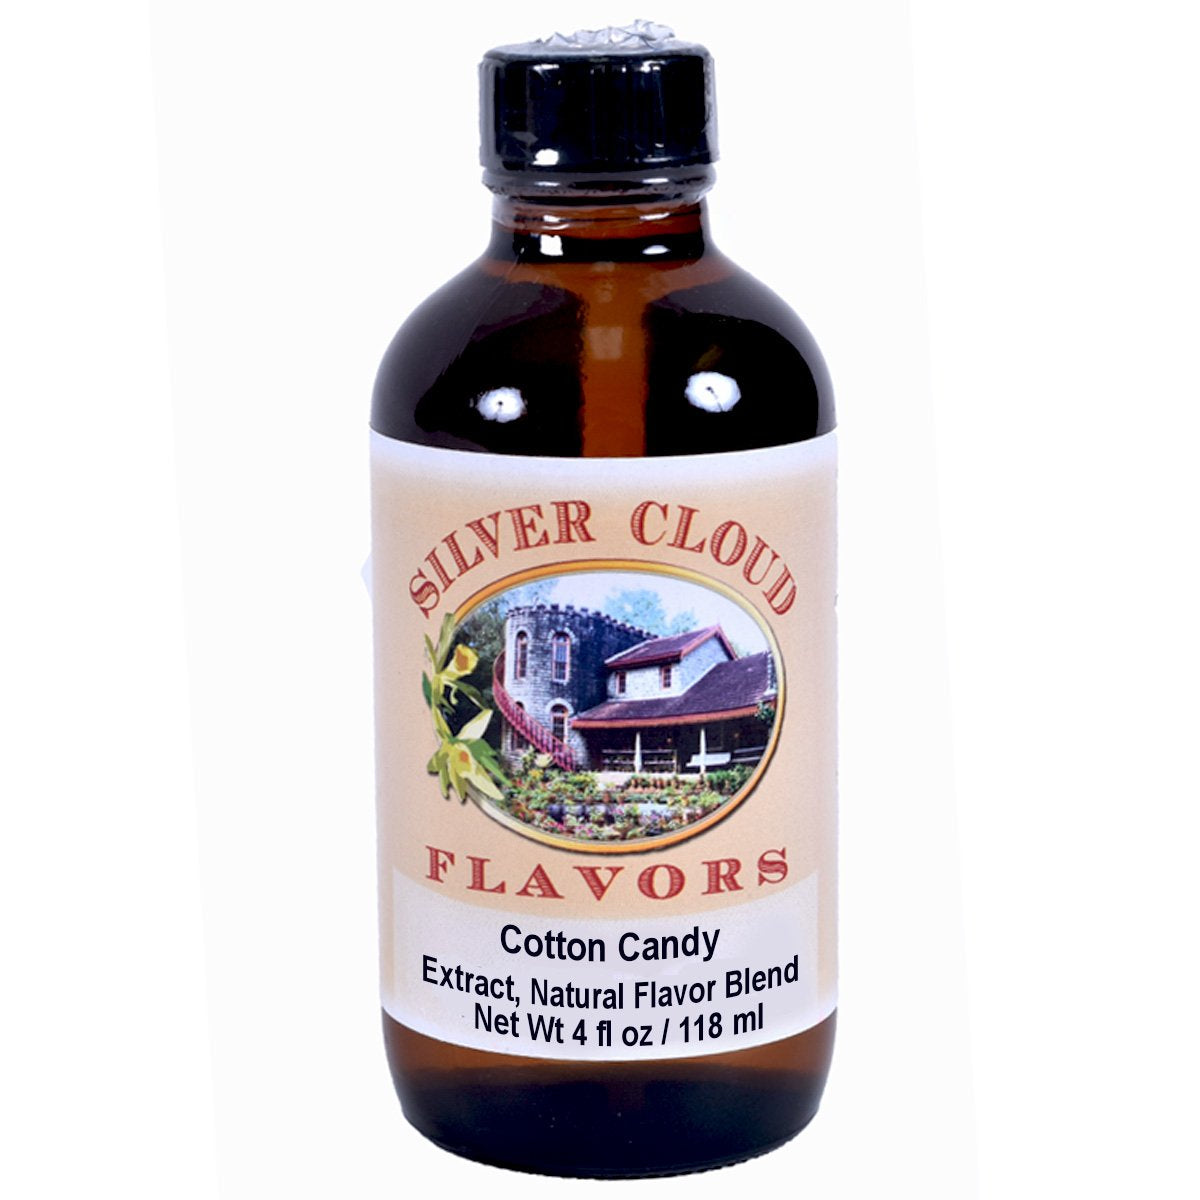 Cotton Candy Extract, Natural & Artificial Silver Cloud Extract - Bake Supply Plus